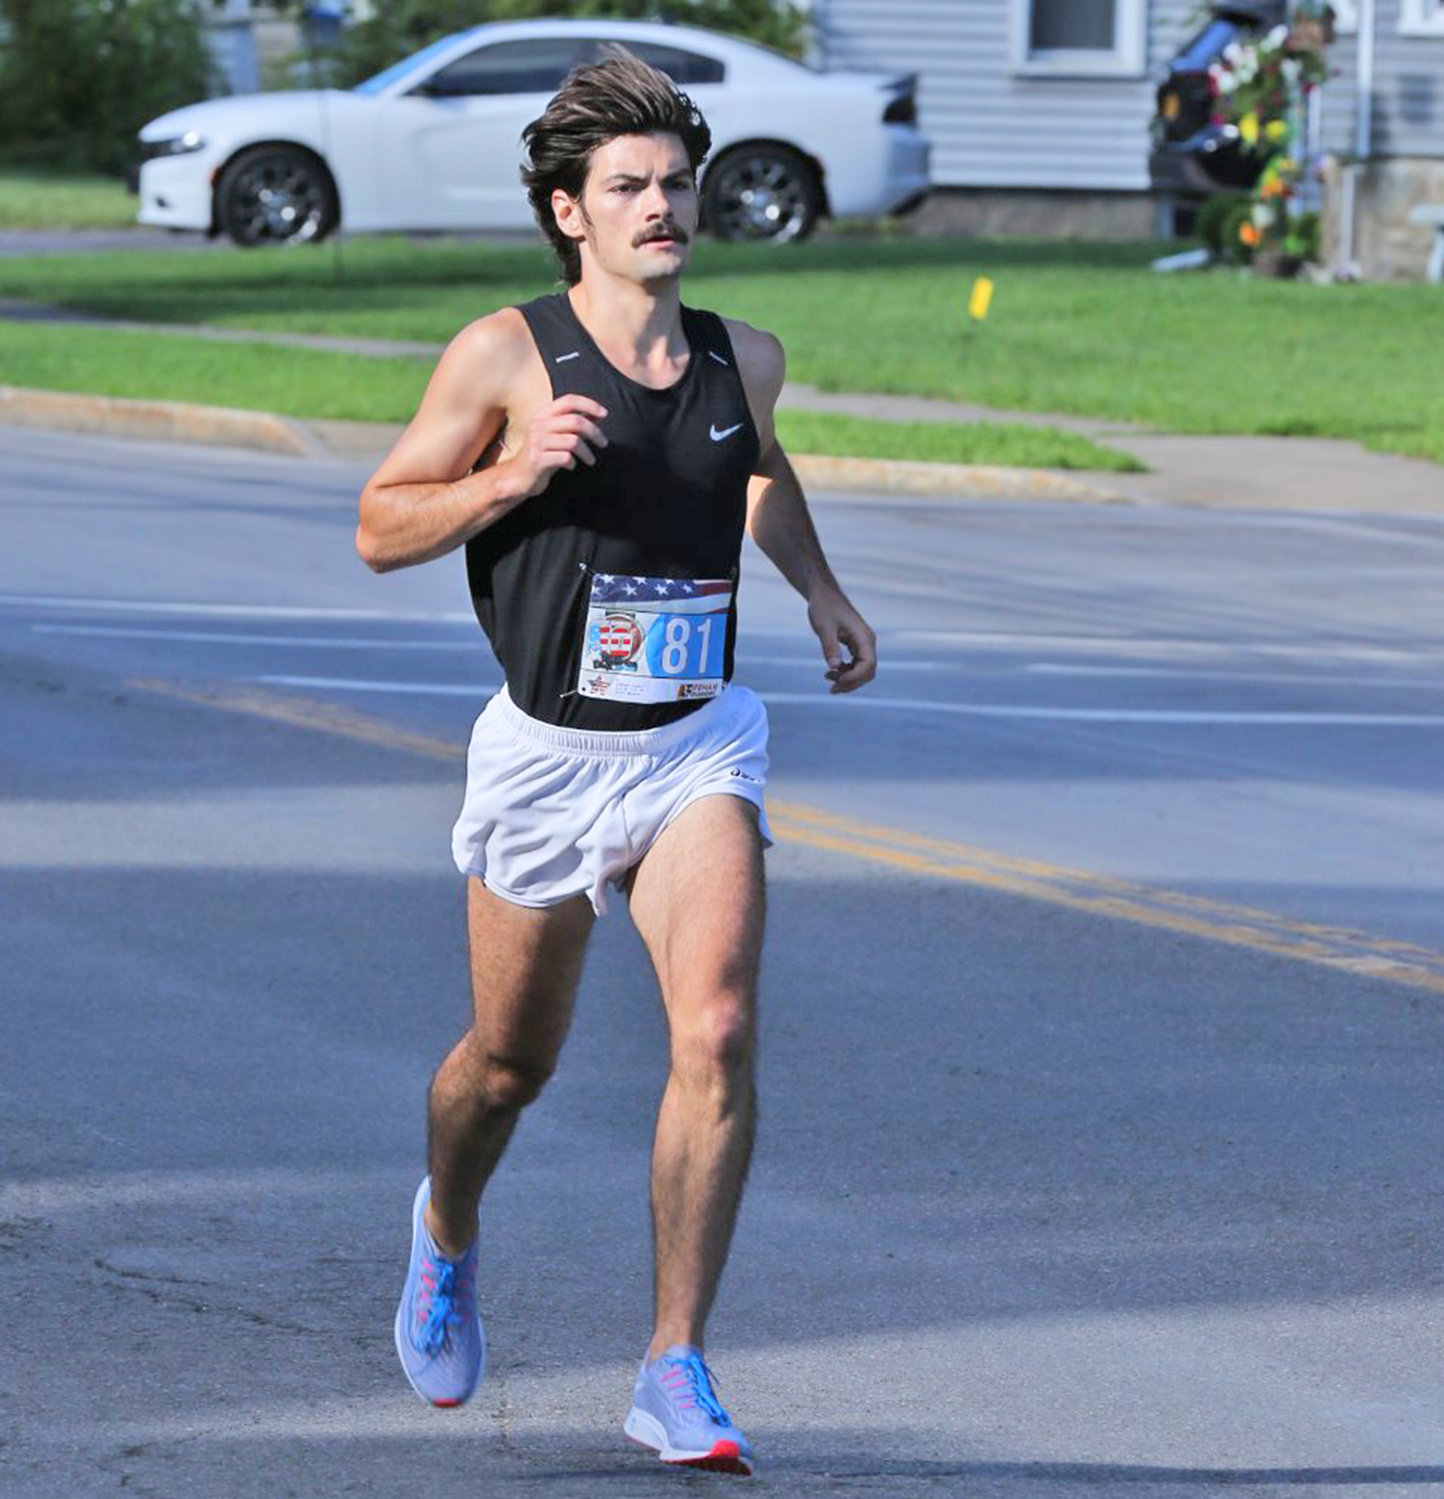 Jordon Hoffman from Rome took second place in the 50th annual Honor America Days 5K parade run in Rome Saturday. His time was 16:08.